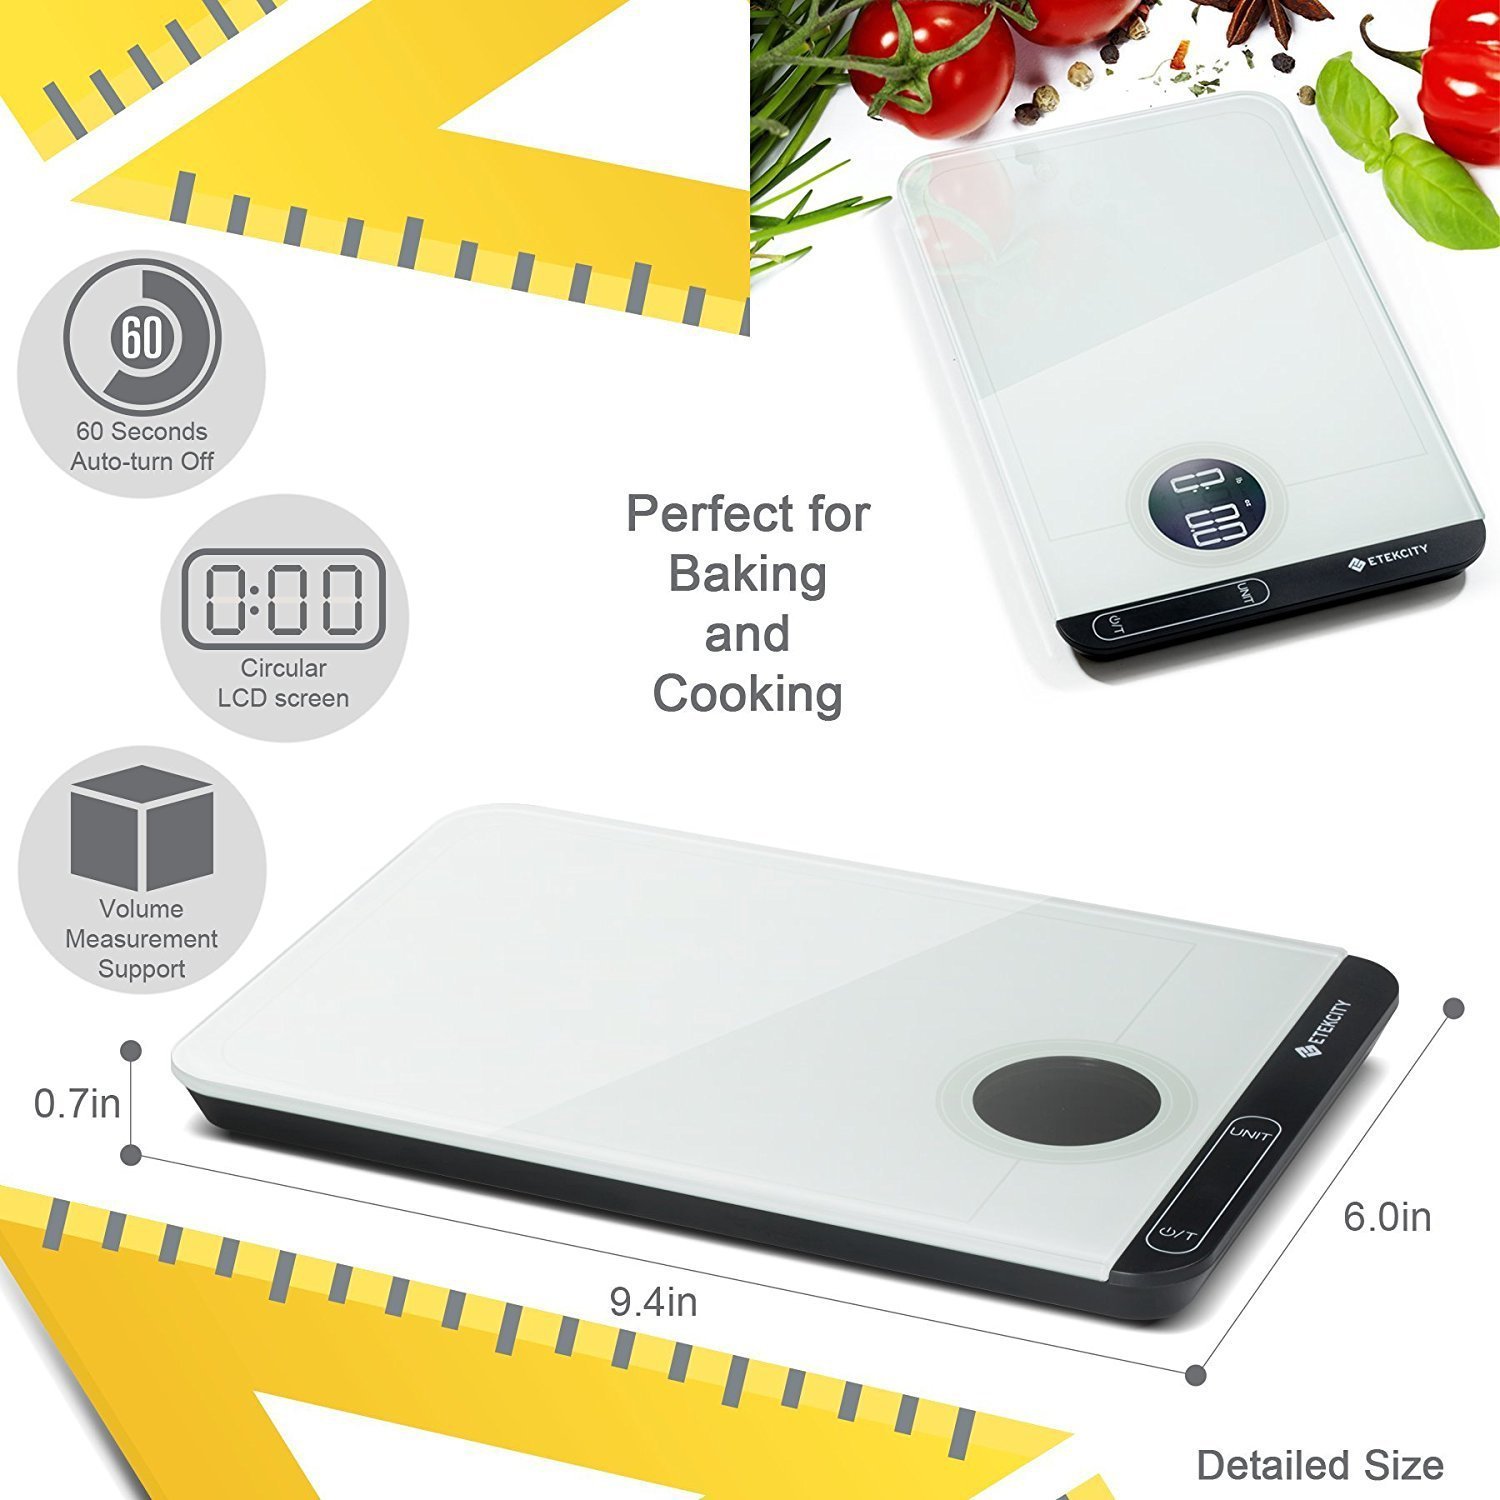 Etekcity Food Kitchen Scale, Digital Grams and Oz for Cooking, Baking, Weight Loss, Meal Prep, Shipping, and Dieting, 11lb/5kg, White